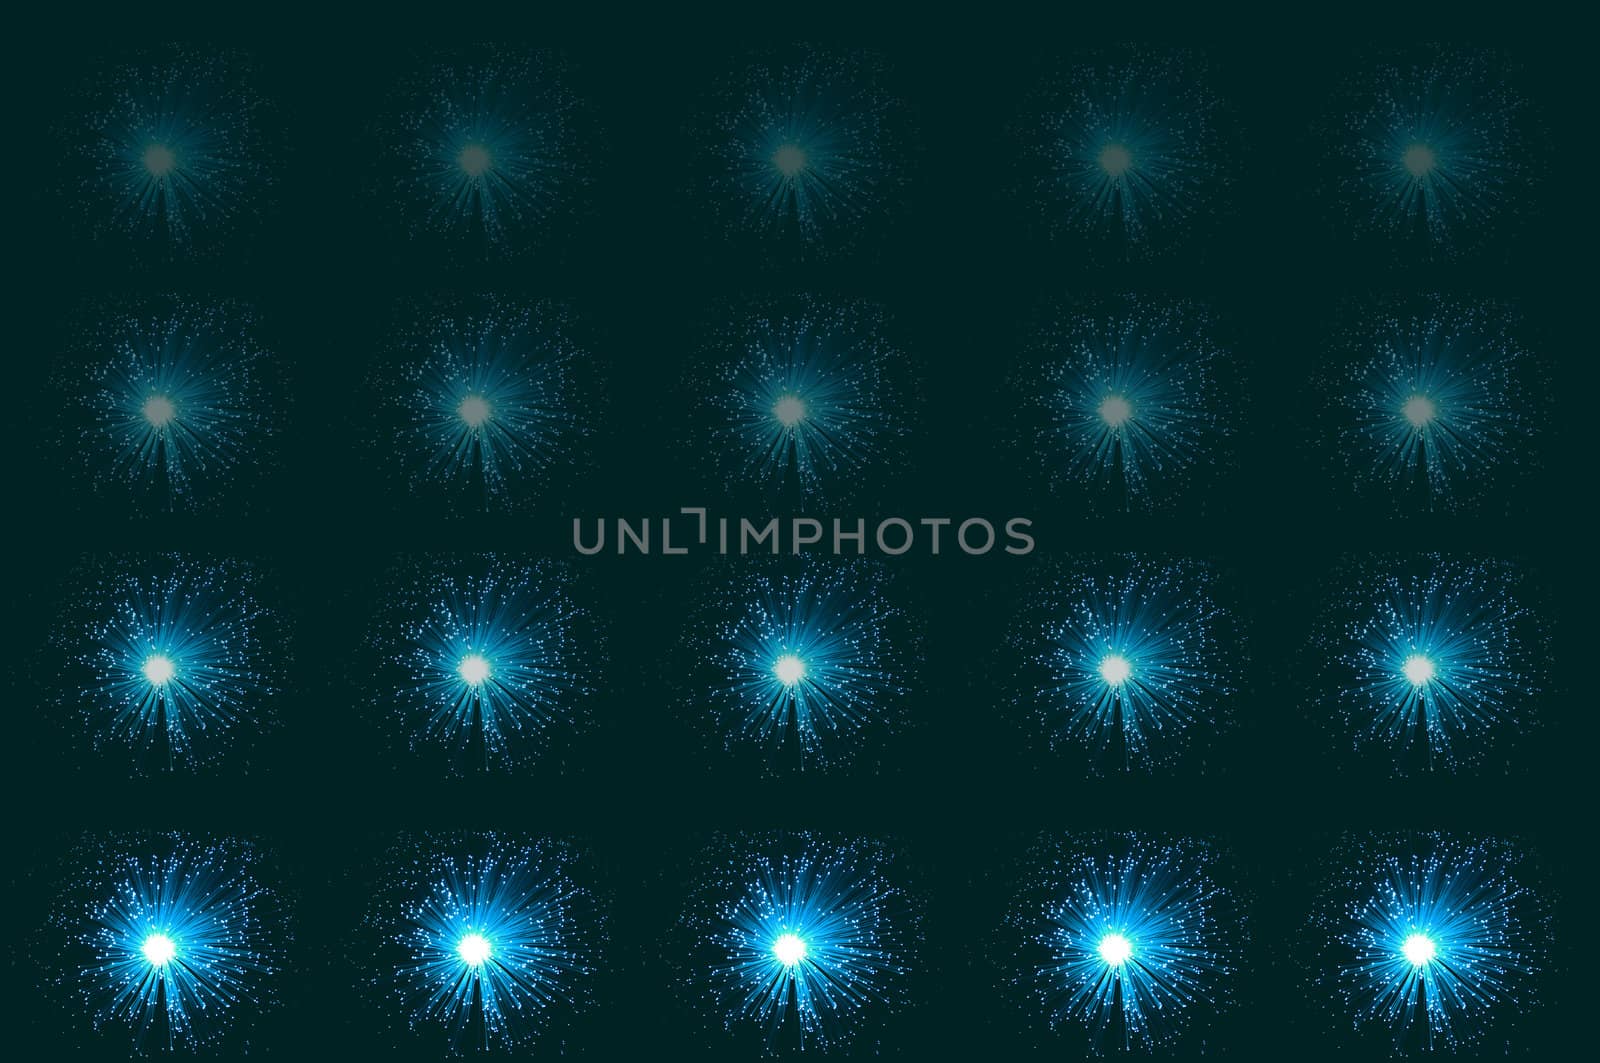 Twenty small illuminated aqua coloured fibre optic lamps in horizontal line formations with each line fading progressively towards the top of the image. Aqua-green background.